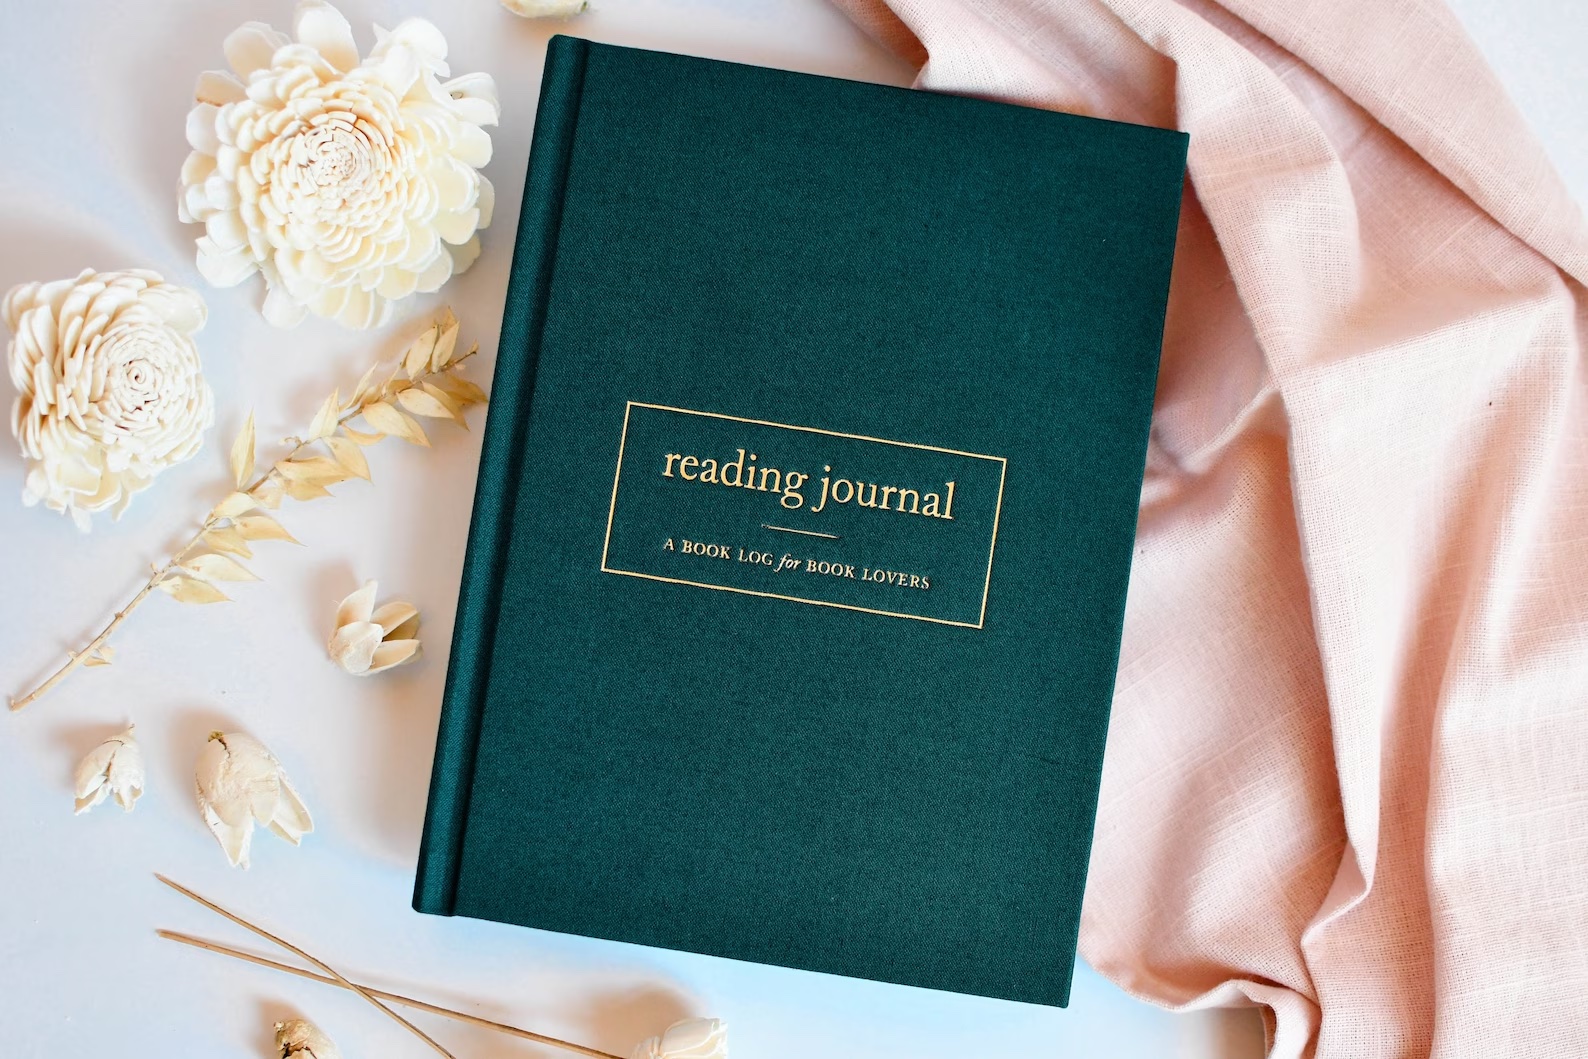 a photo of a hardback reading journal with gold embossing that says "reading journal" across the front.